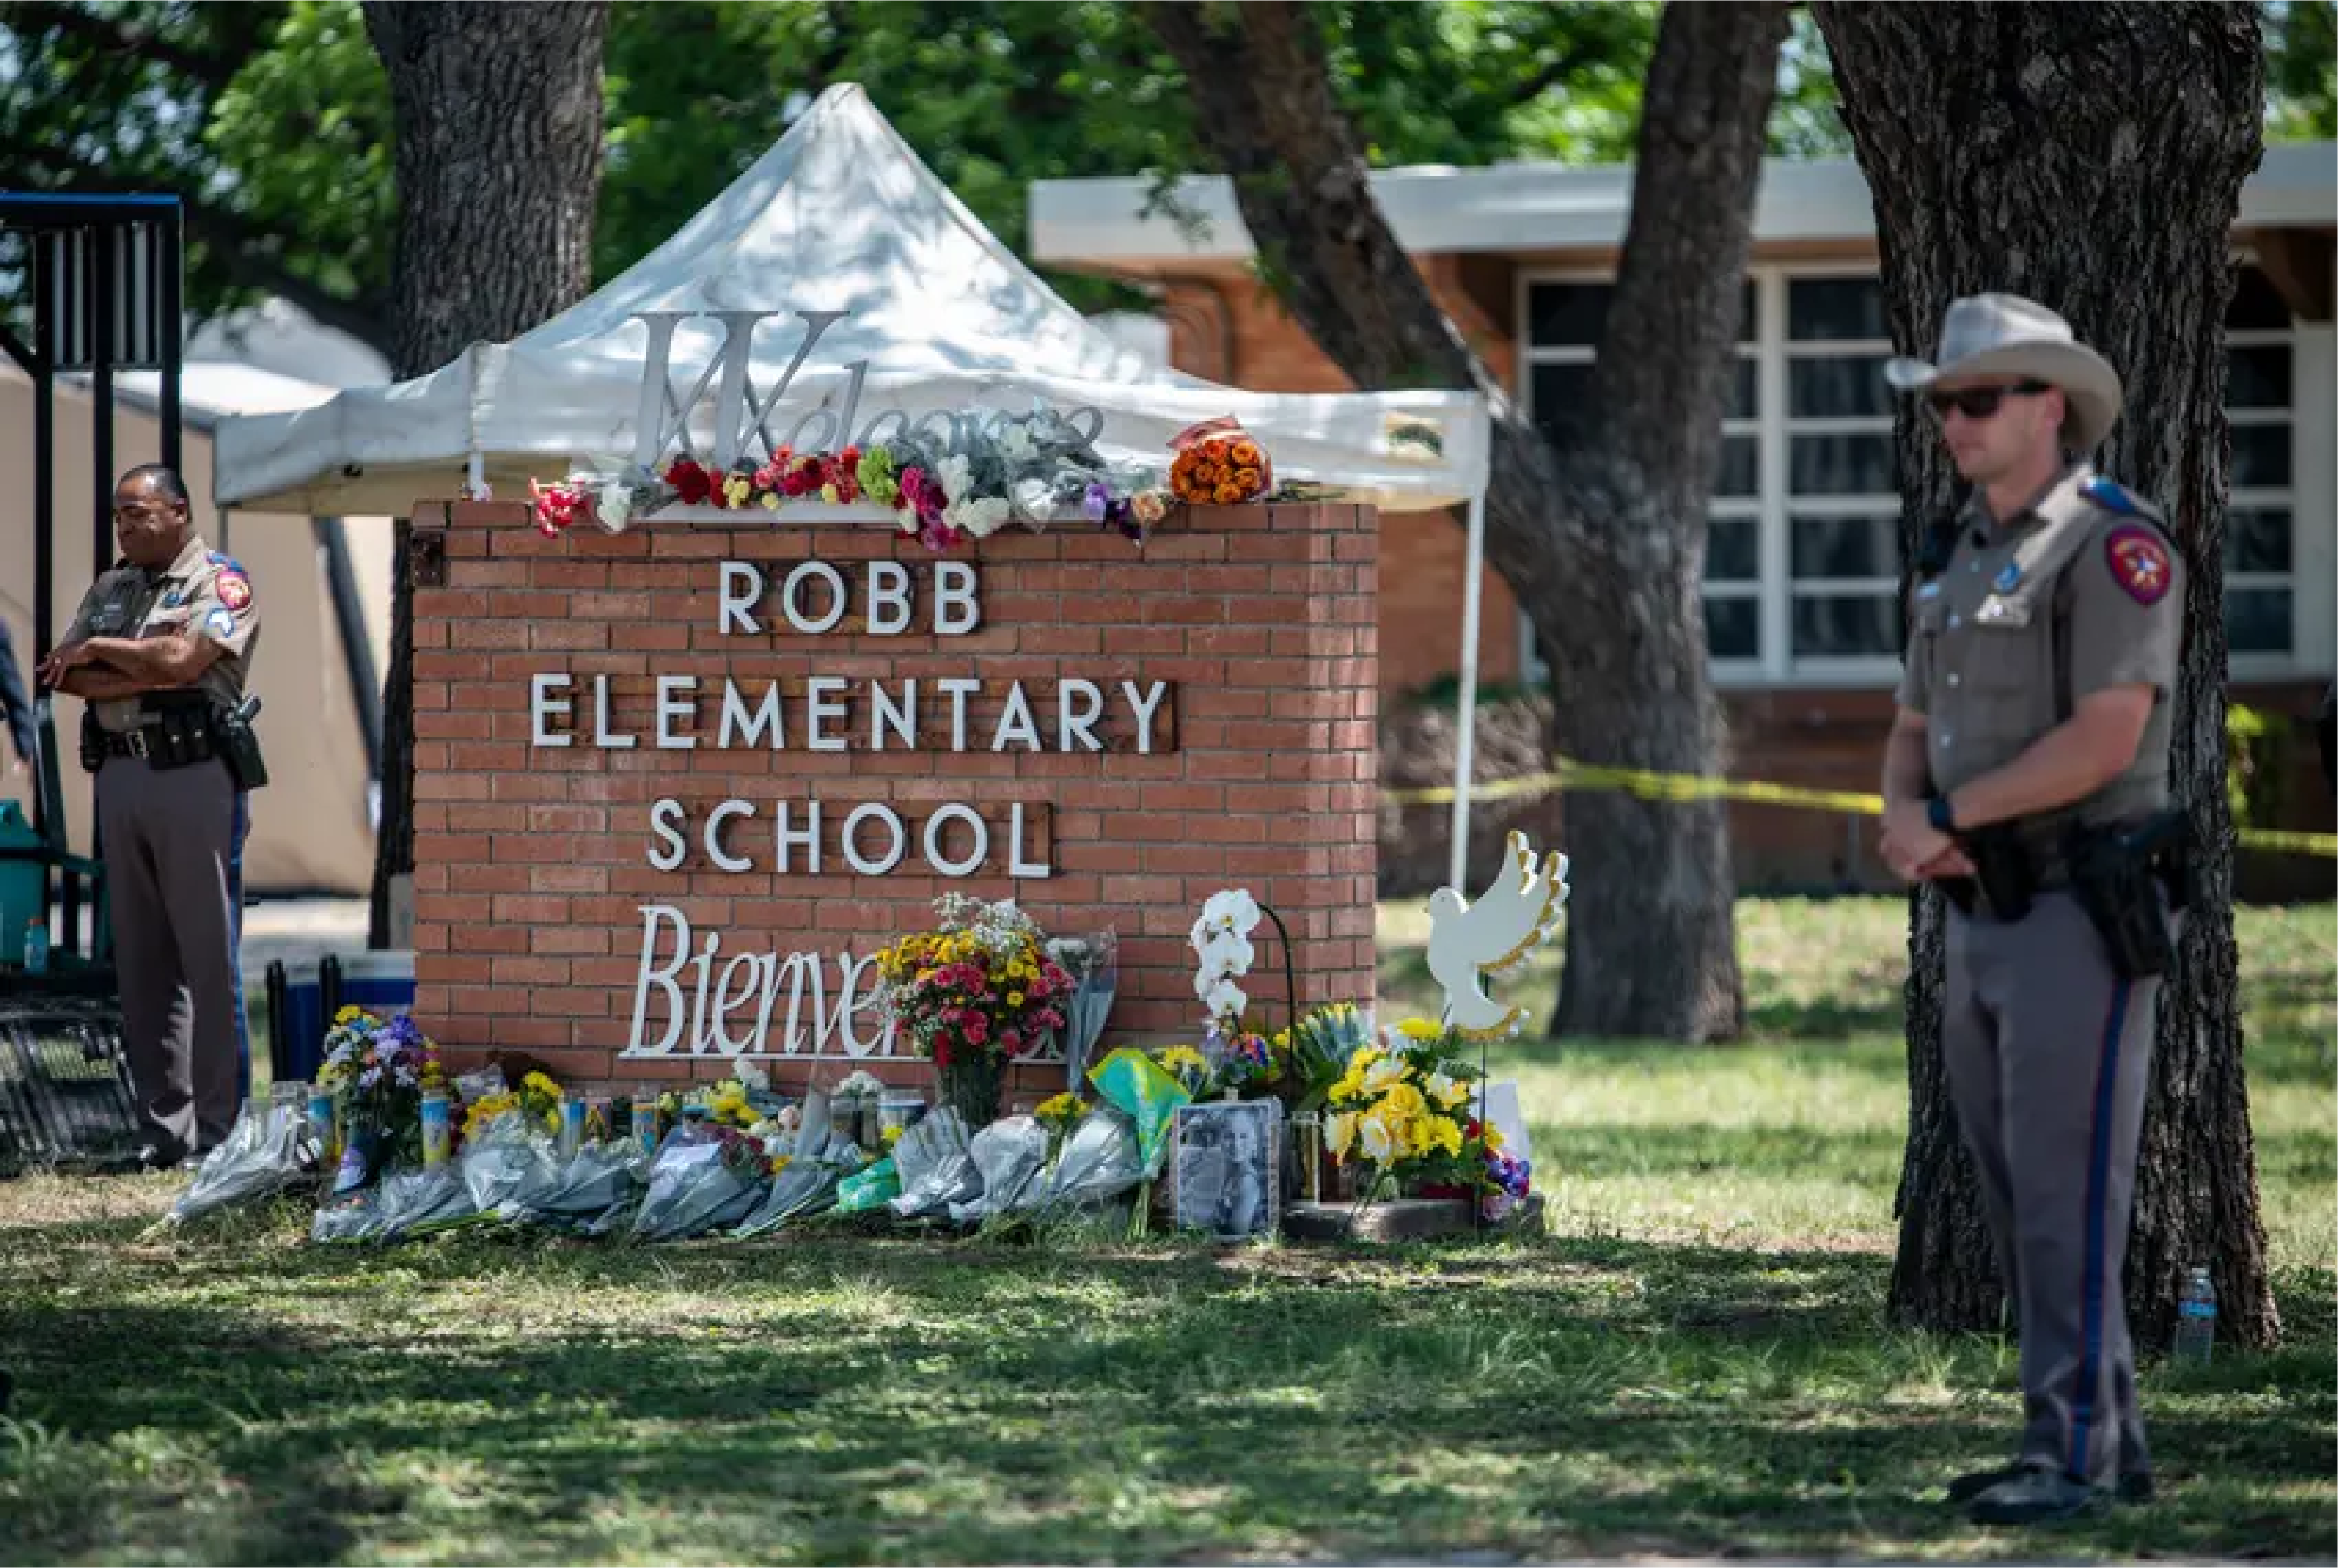 Law enforcement personnel work at the scene of a mass shooting in Robb Elementary School in Uvalde, Texas, May 25, 2022. (Nuri Vallbona/Reuters)